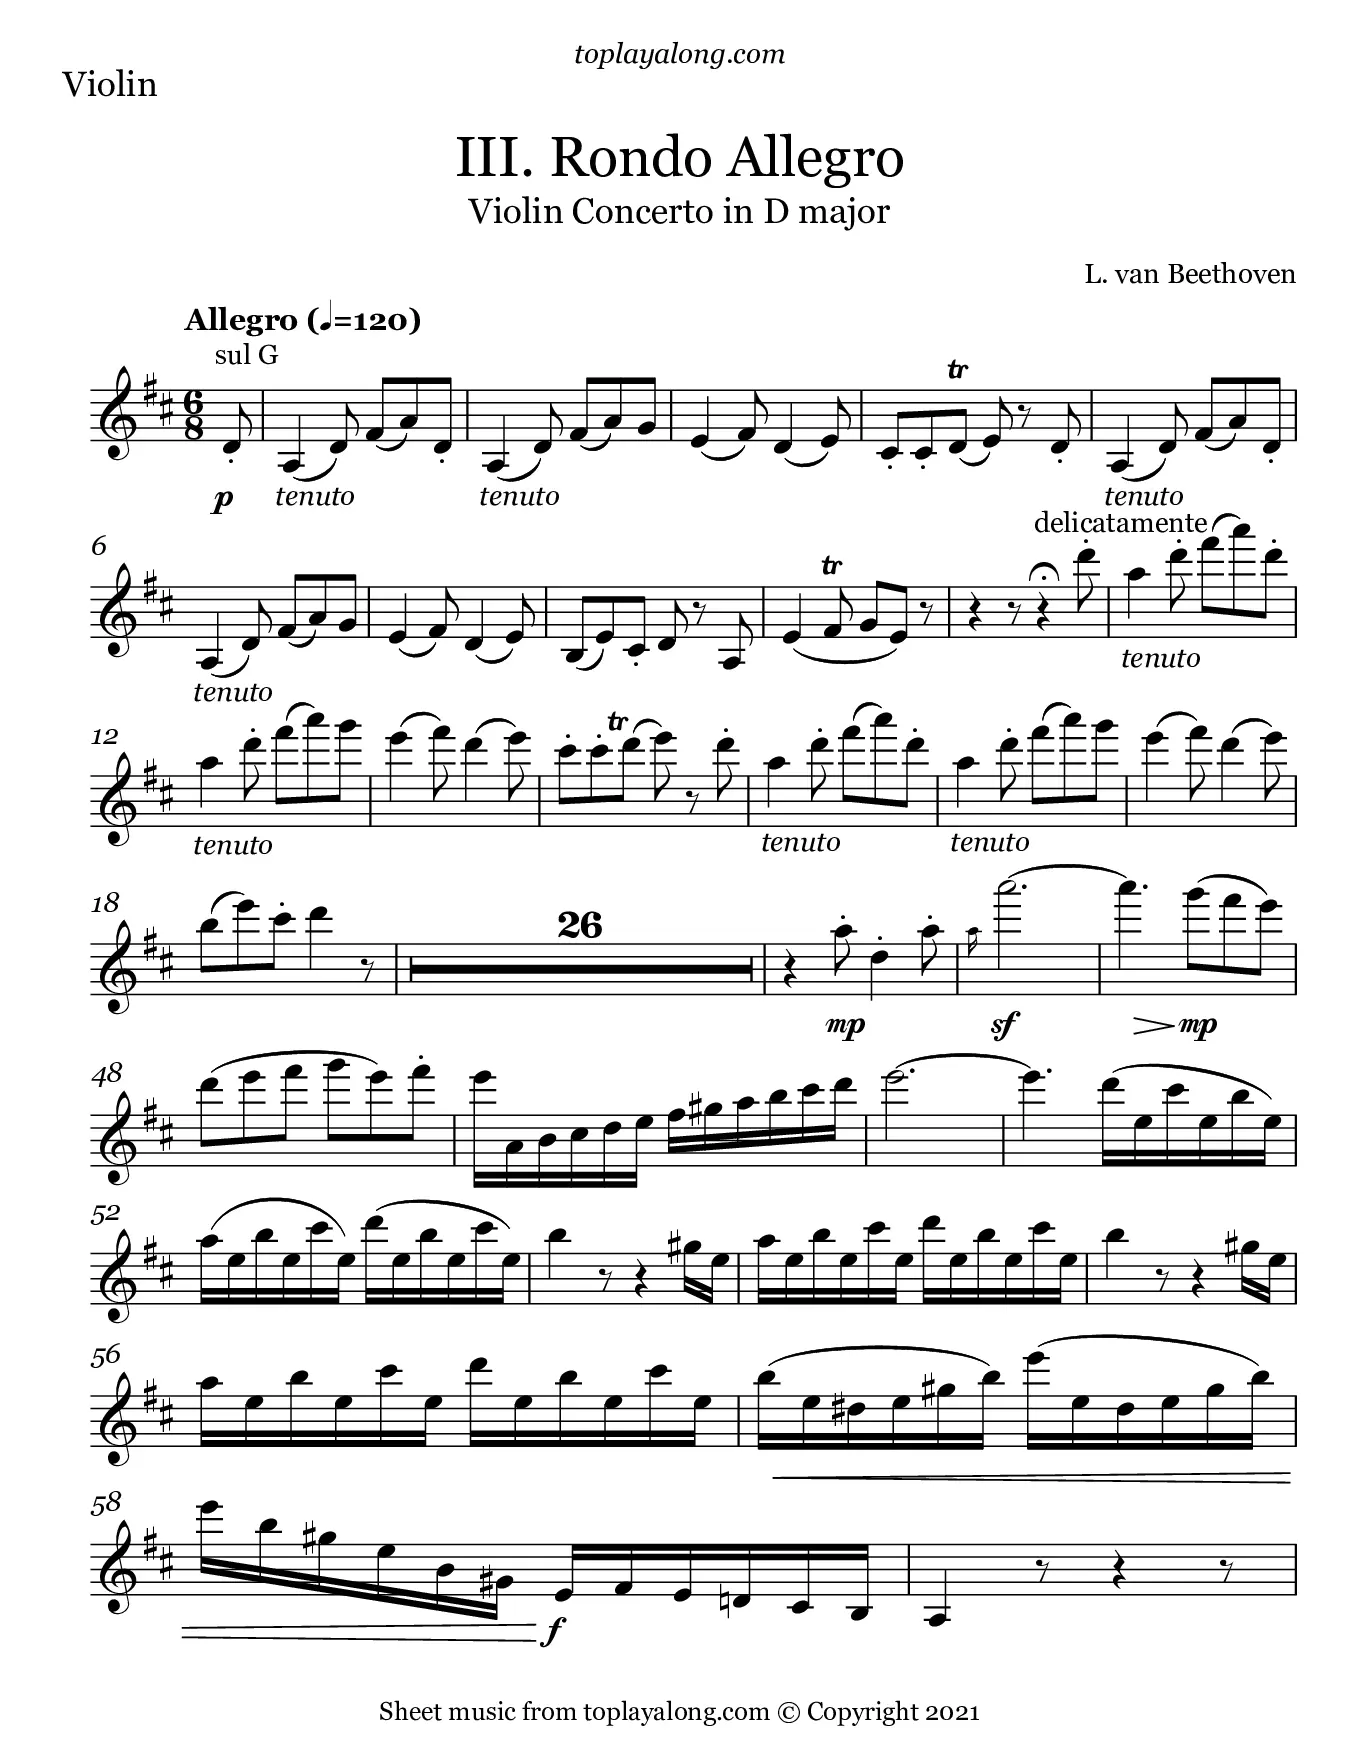 about beethoven violin concerto - What is the description of a Violin Concerto